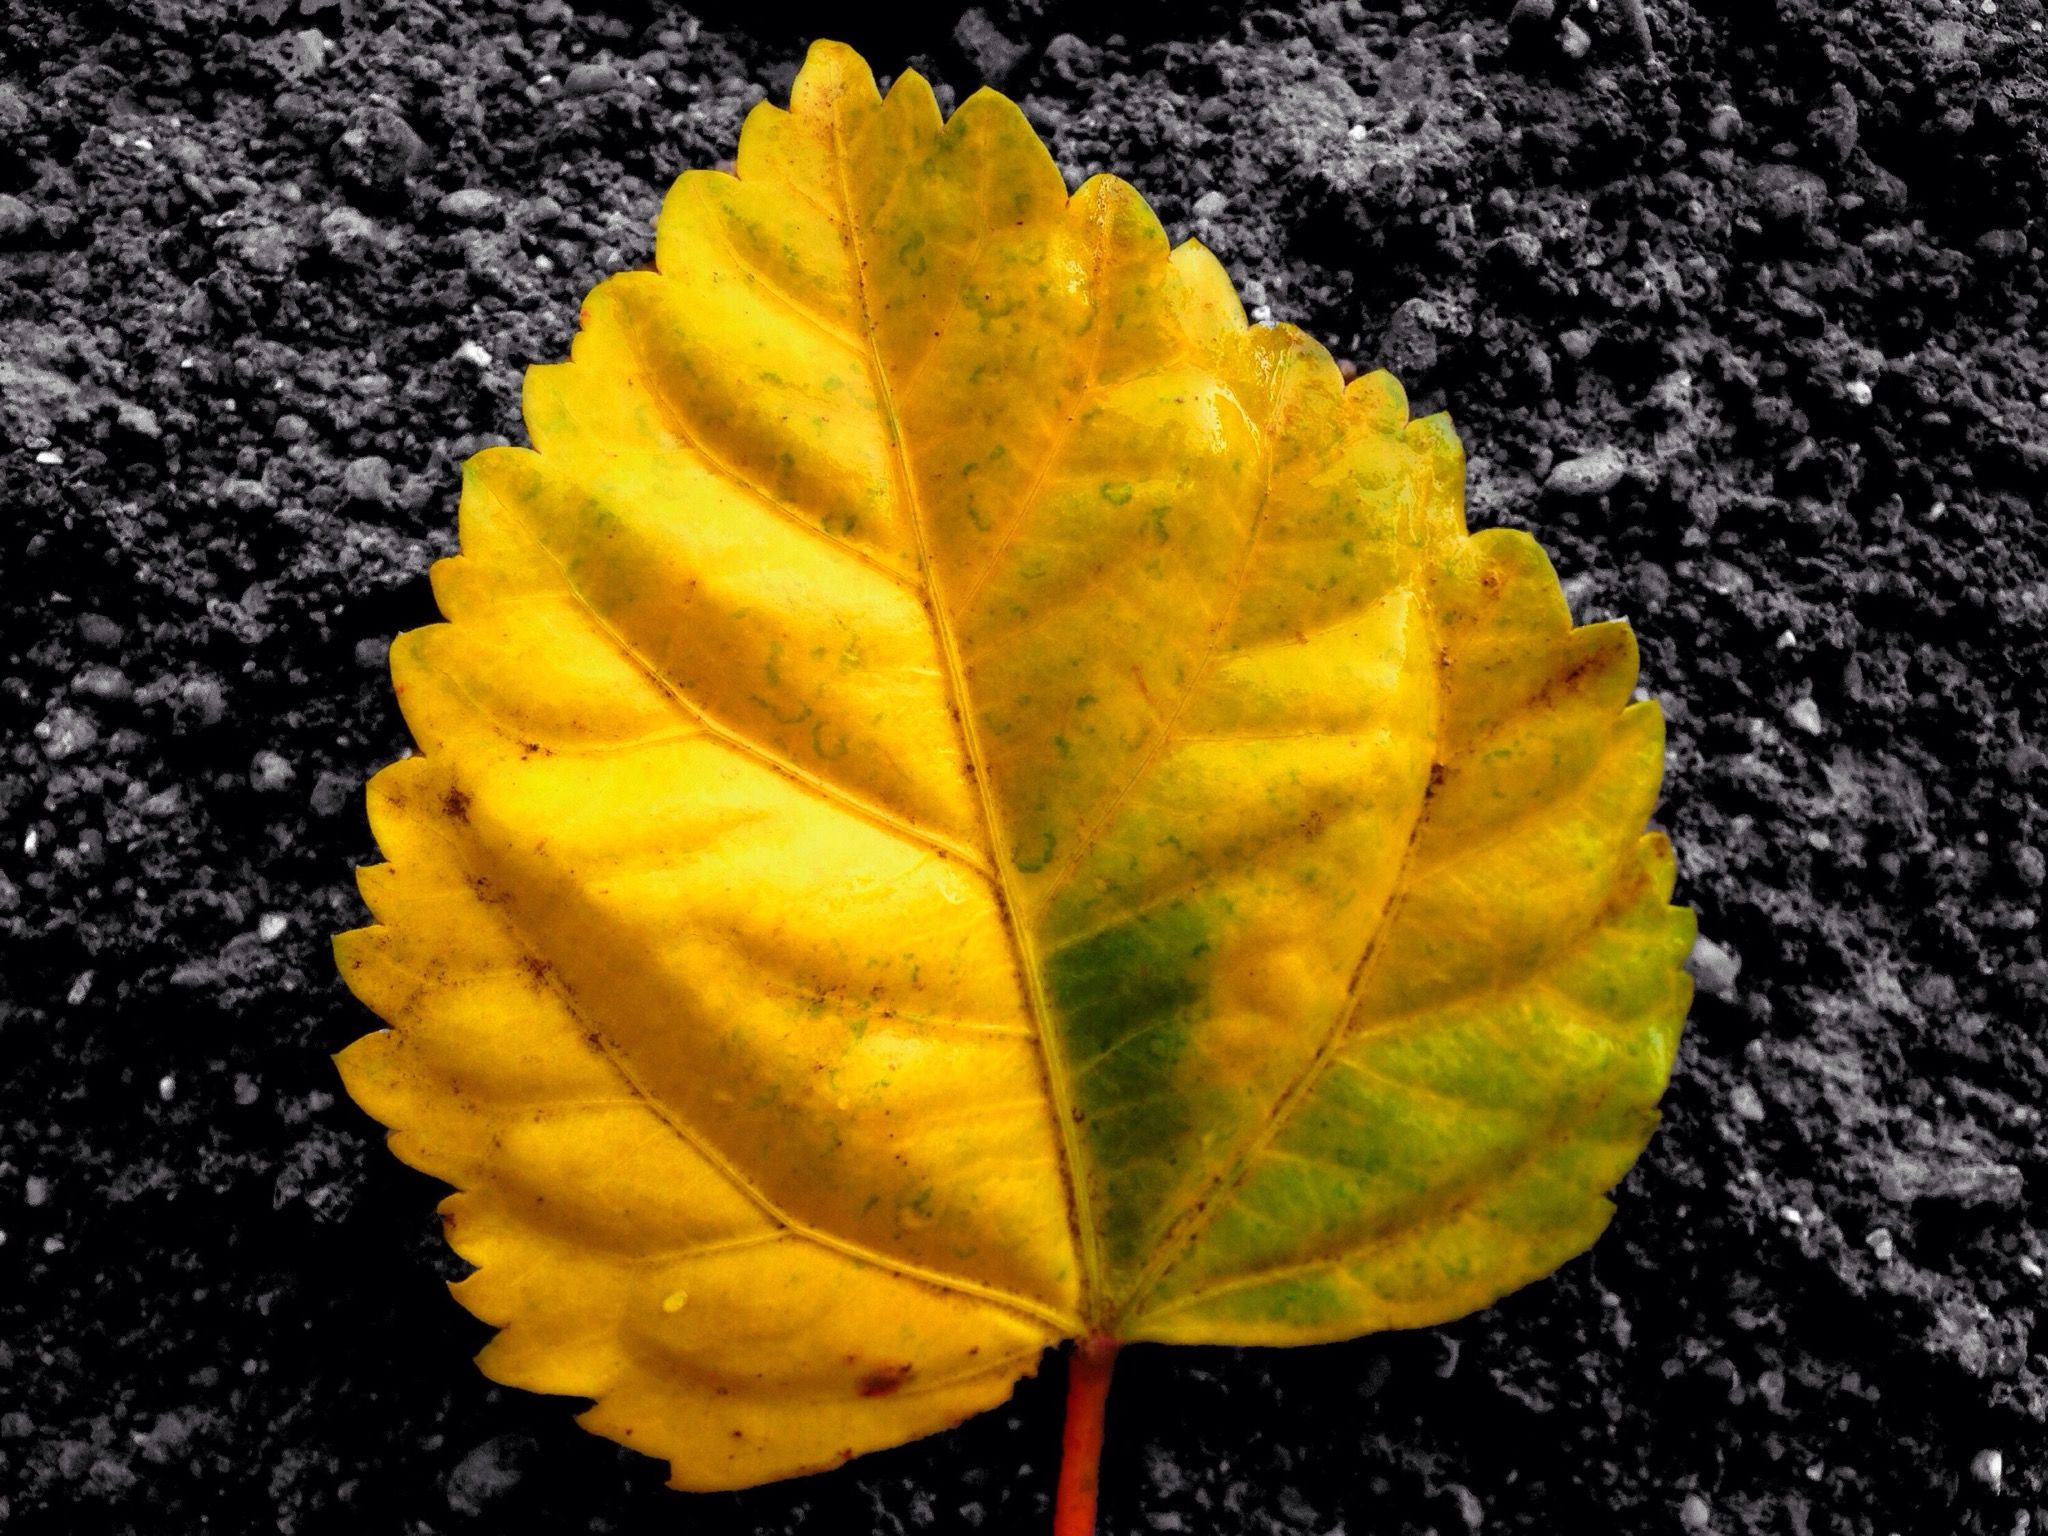 leaf, yellow, leaf vein, autumn, nature, high angle view, close-up, natural pattern, fragility, growth, change, beauty in nature, leaves, outdoors, day, no people, season, green color, textured, sunlight